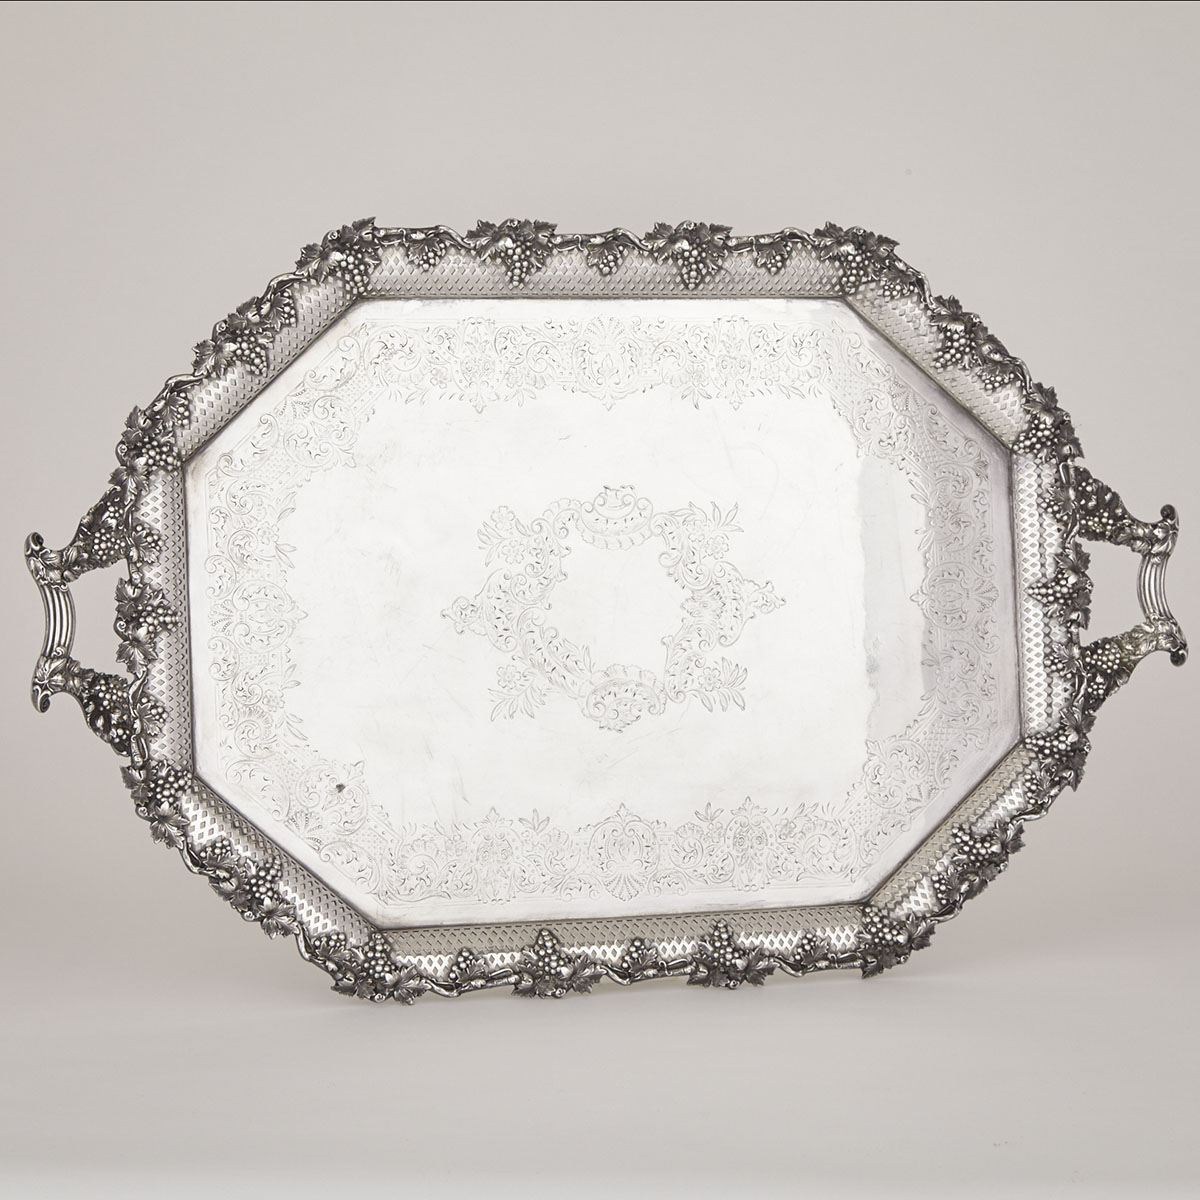 English Silver Plated Two-Handled Serving Octagonal Tray, Ellis-Barker Co., 20th century